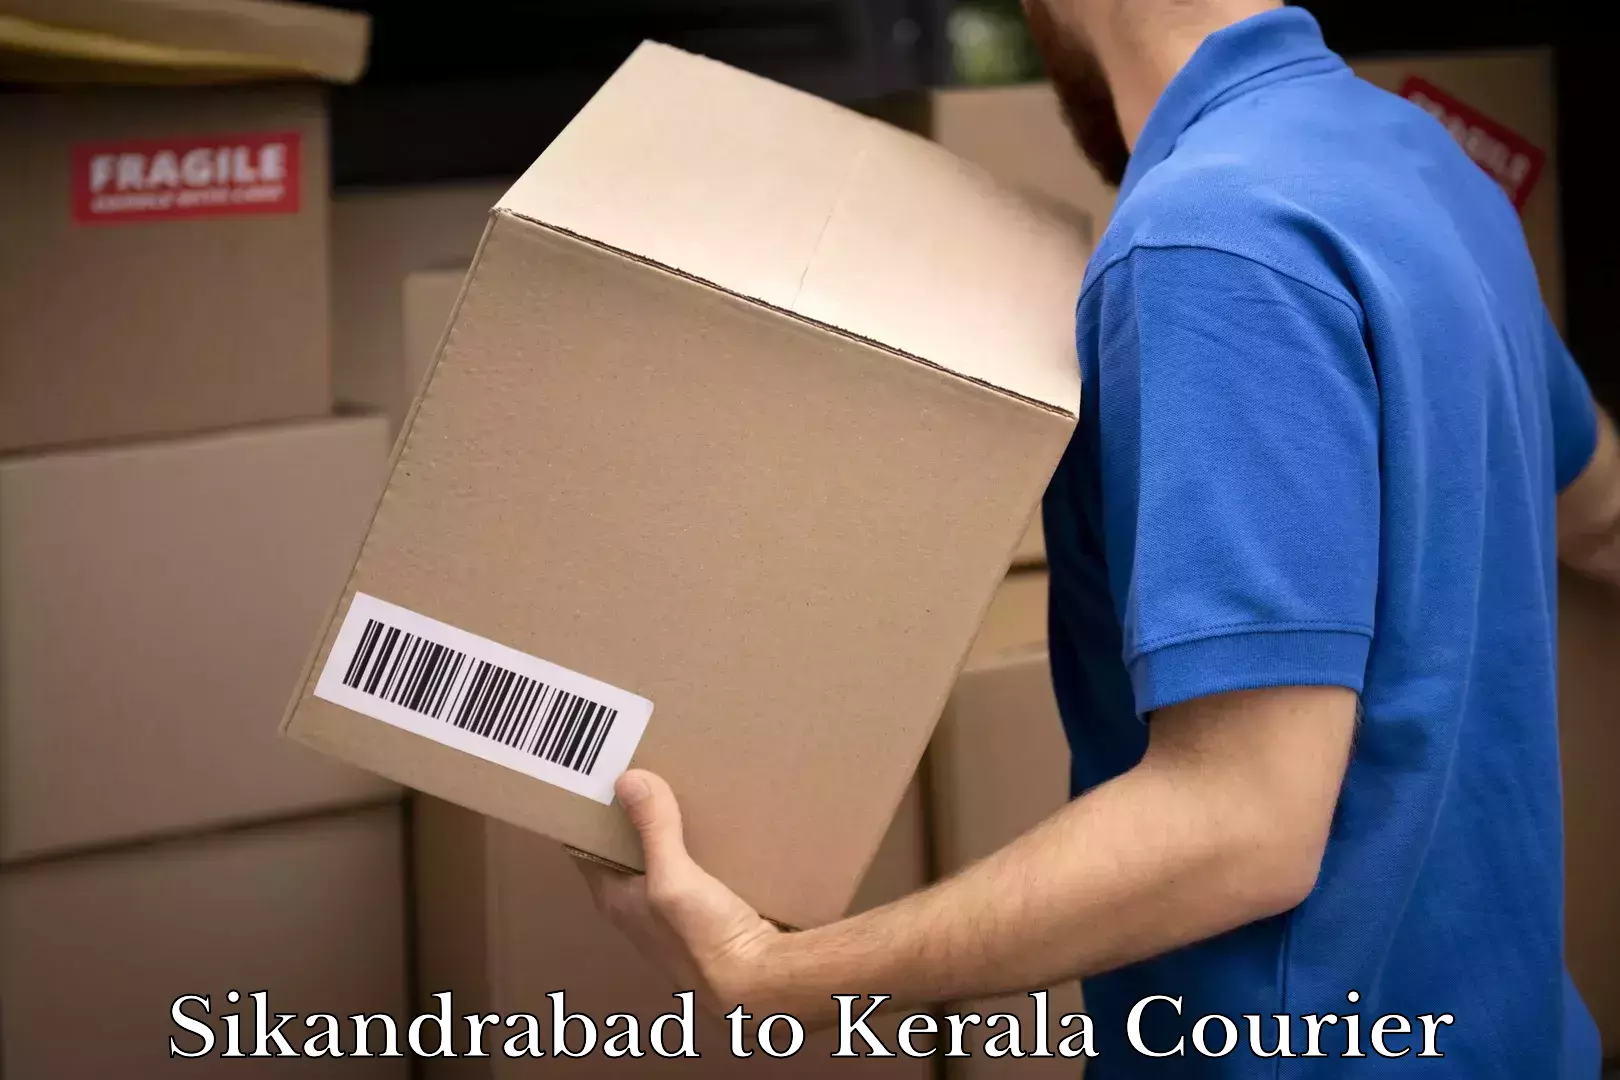 Full-service courier options Sikandrabad to Kerala